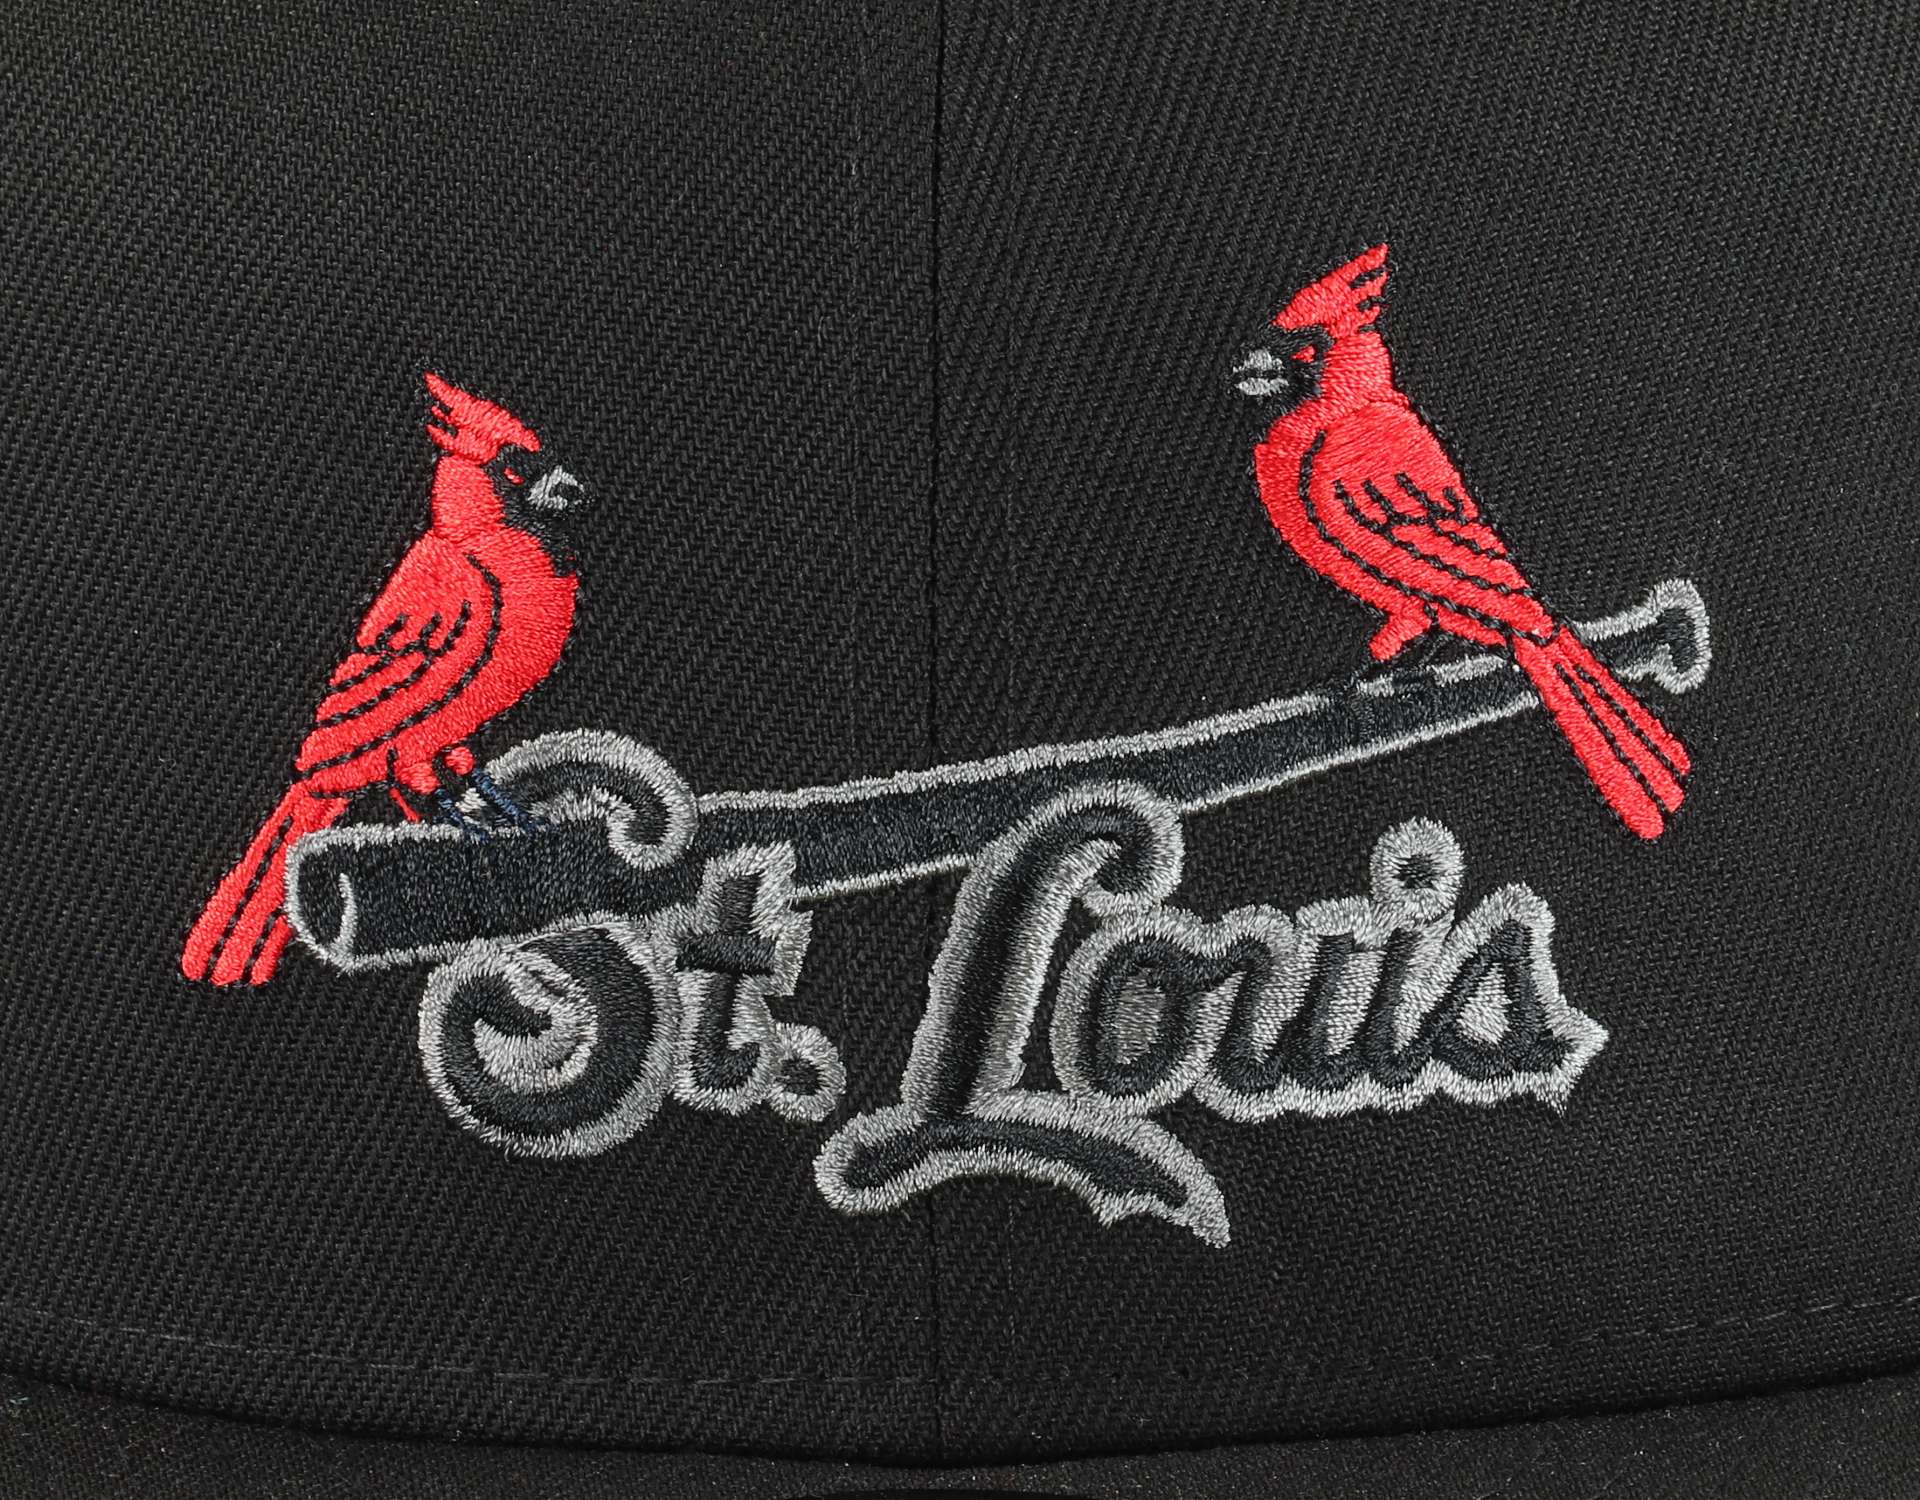 St. Louis Cardinals MLB Sidepatch 25th Anniversary Black Cooperstown 59Fifty Basecap New Era